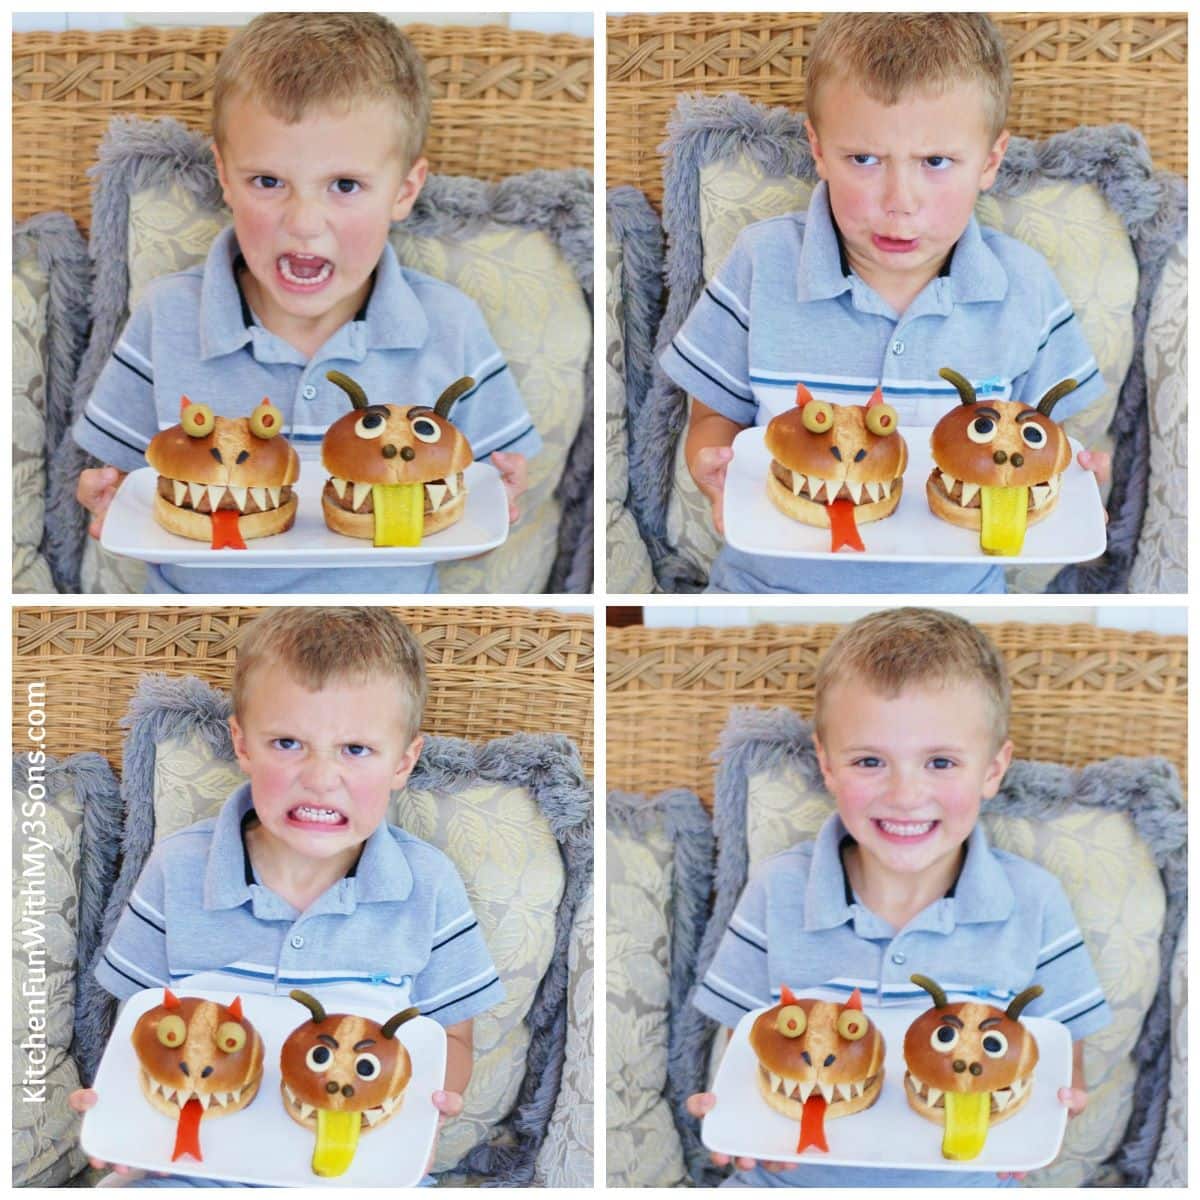 4 year old loved his Monster Burgers and also loved making monster faces!
 